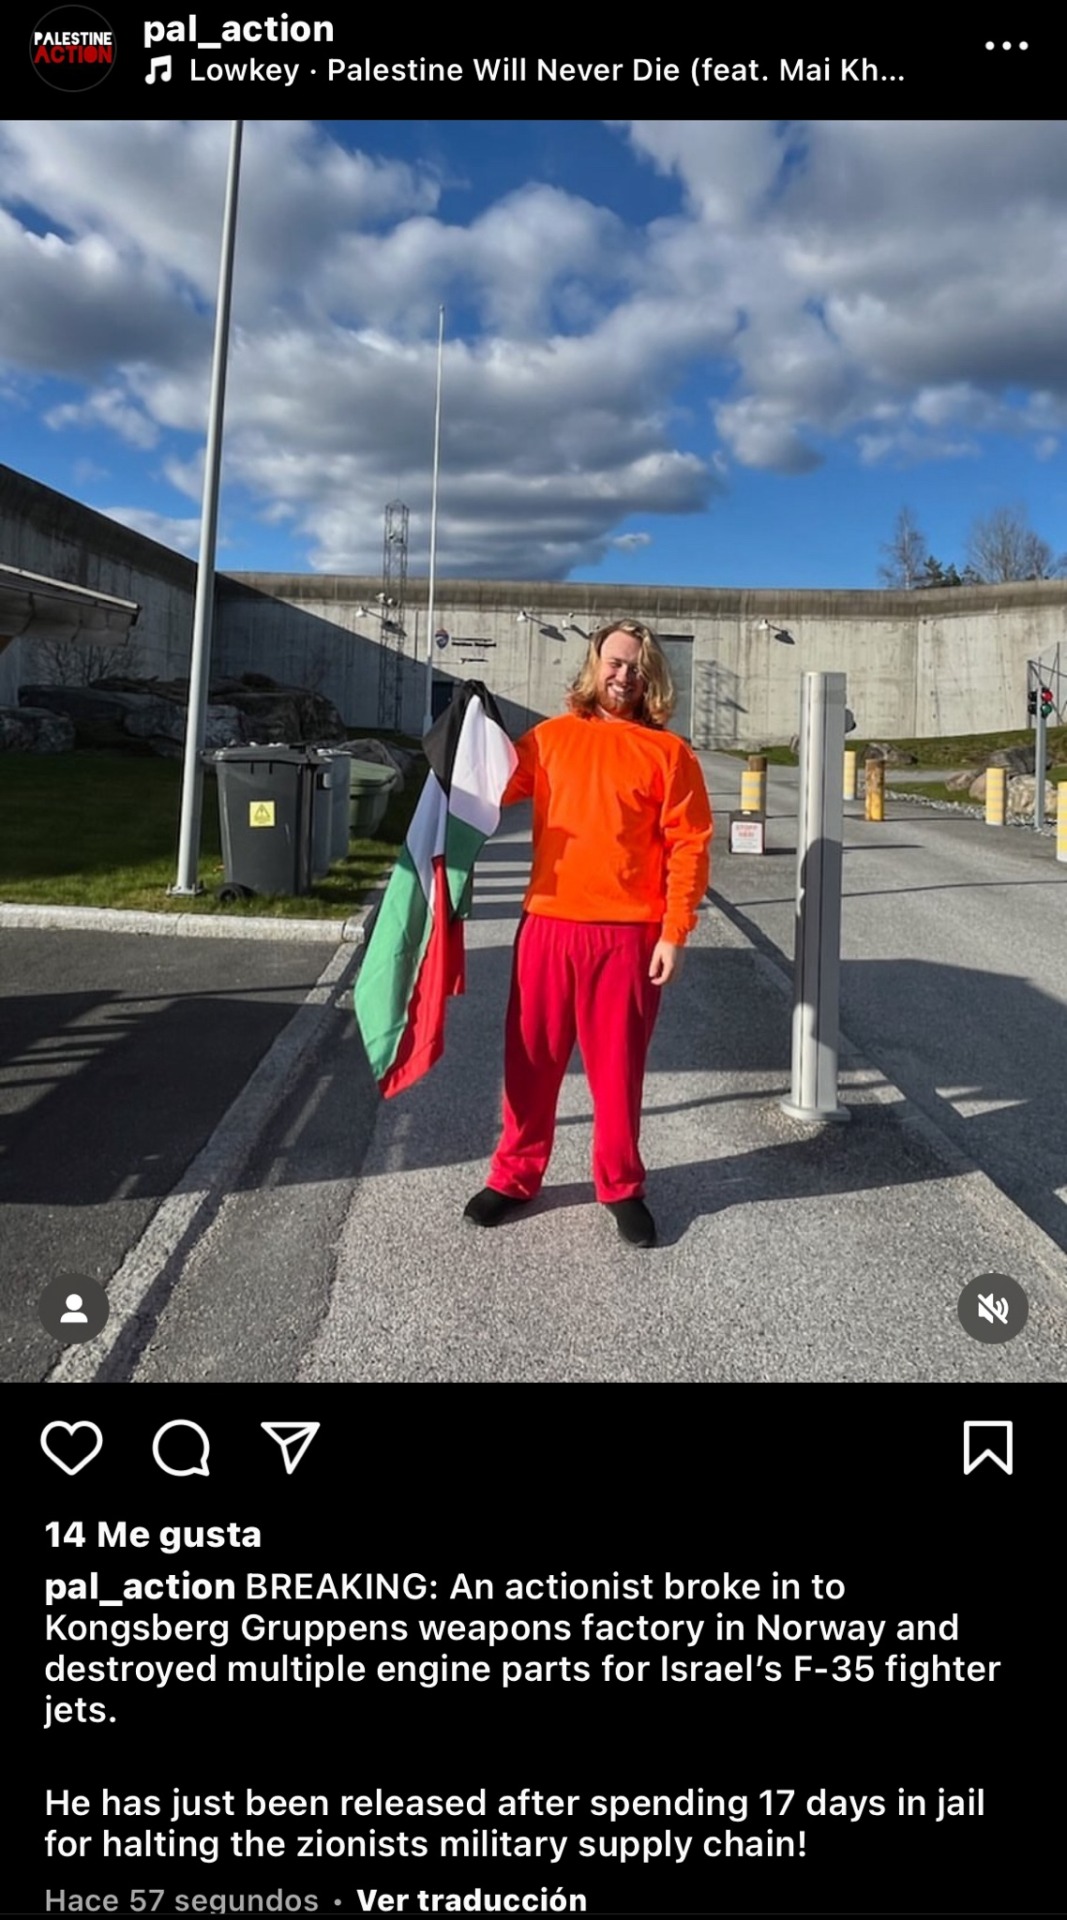 A post by Pal_action; the image shows an activist in all orange clothes, smiling and holding a palestinian flag. The text reads "An actionist broke in to Kongsberg Gruppens weapons factory in Norway and destroyed multiple engine parts for Israel's F-35 fighter jets. He has just been released after spending 17 days in jail for halting the zionists military supply chain!"